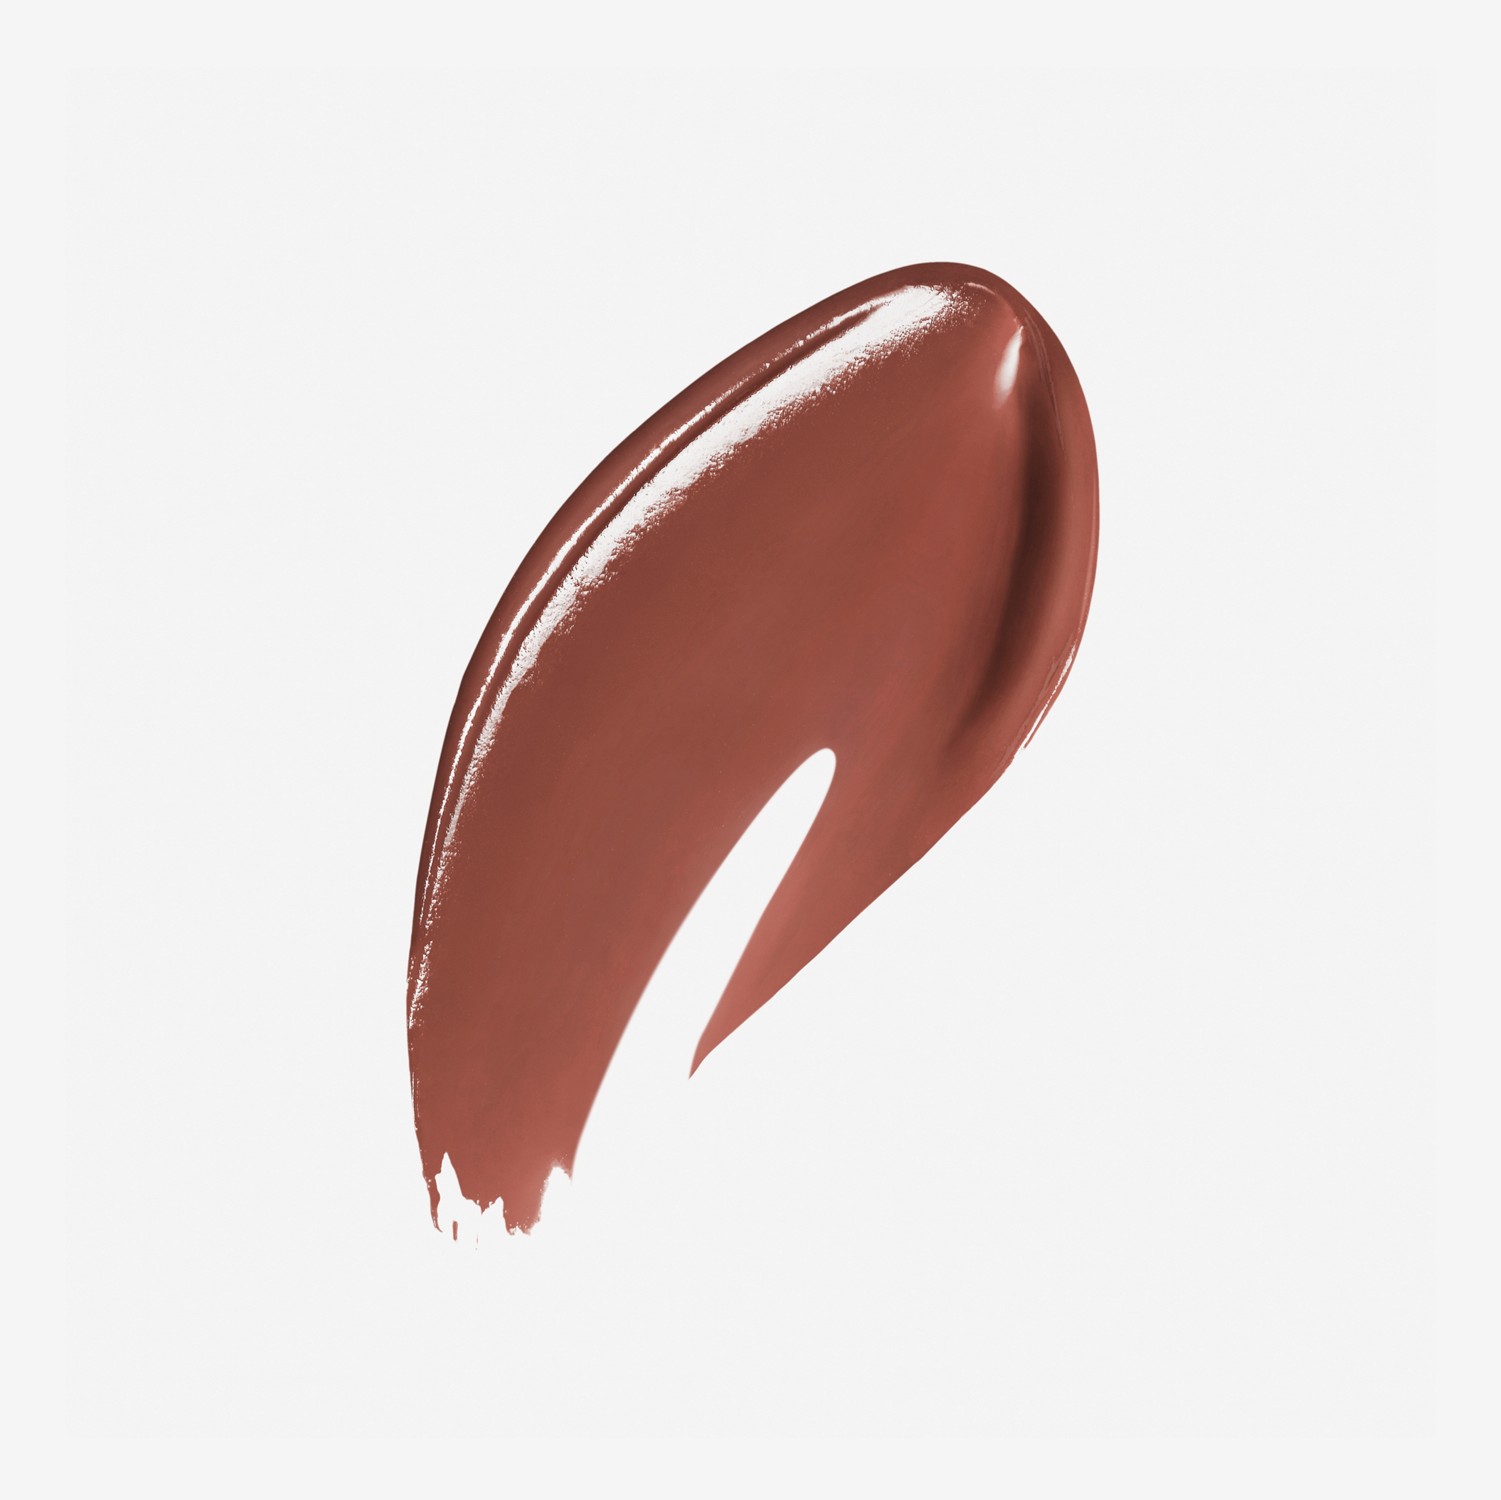 Burberry Kisses – Earthy Rosewood No.83 - Mulheres | Burberry® oficial